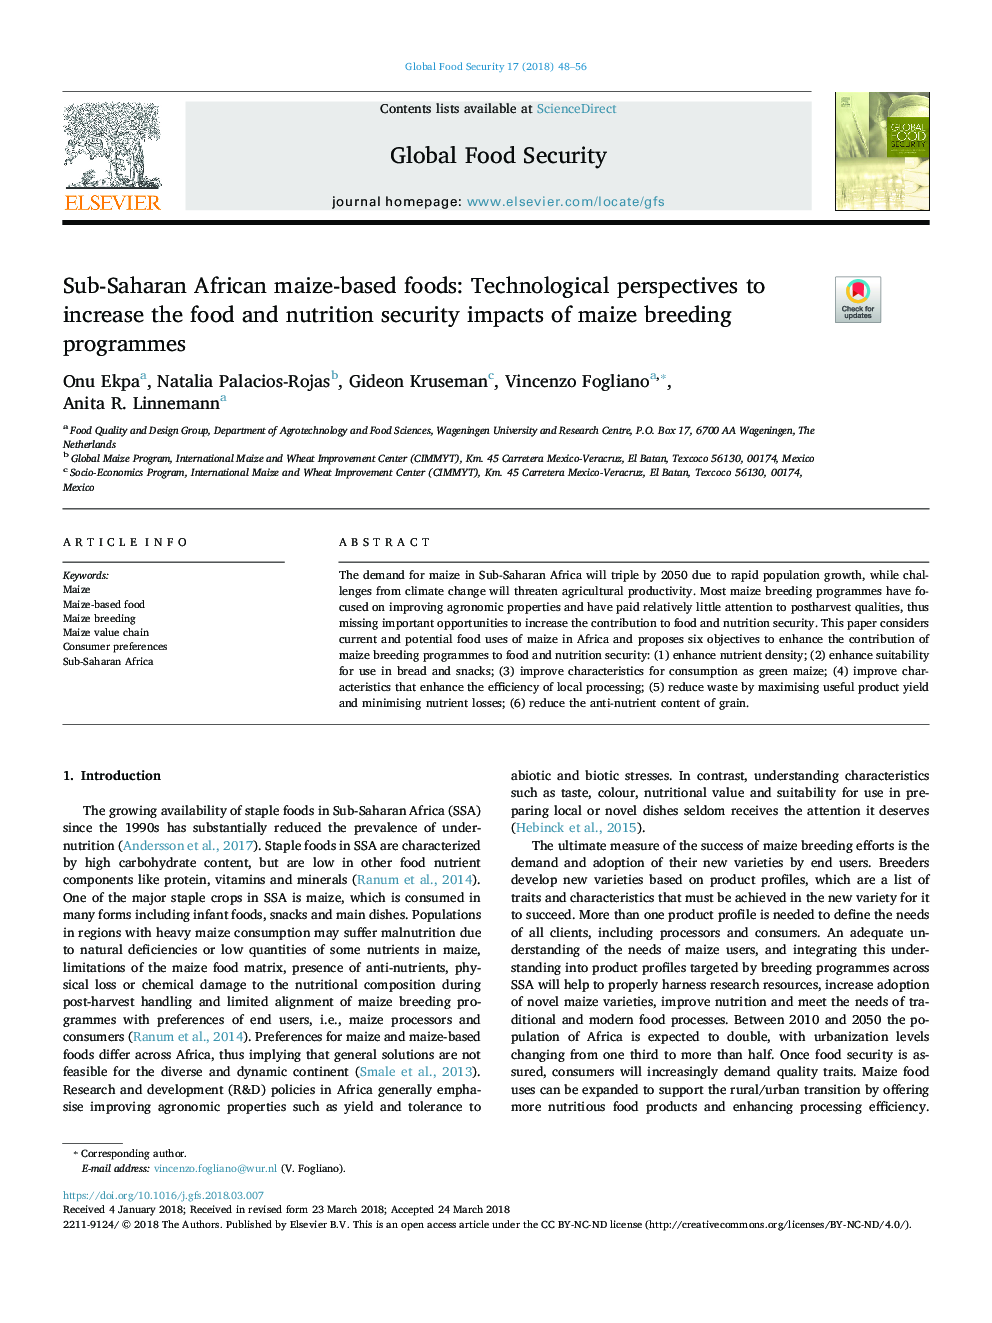 Sub-Saharan African maize-based foods: Technological perspectives to increase the food and nutrition security impacts of maize breeding programmes